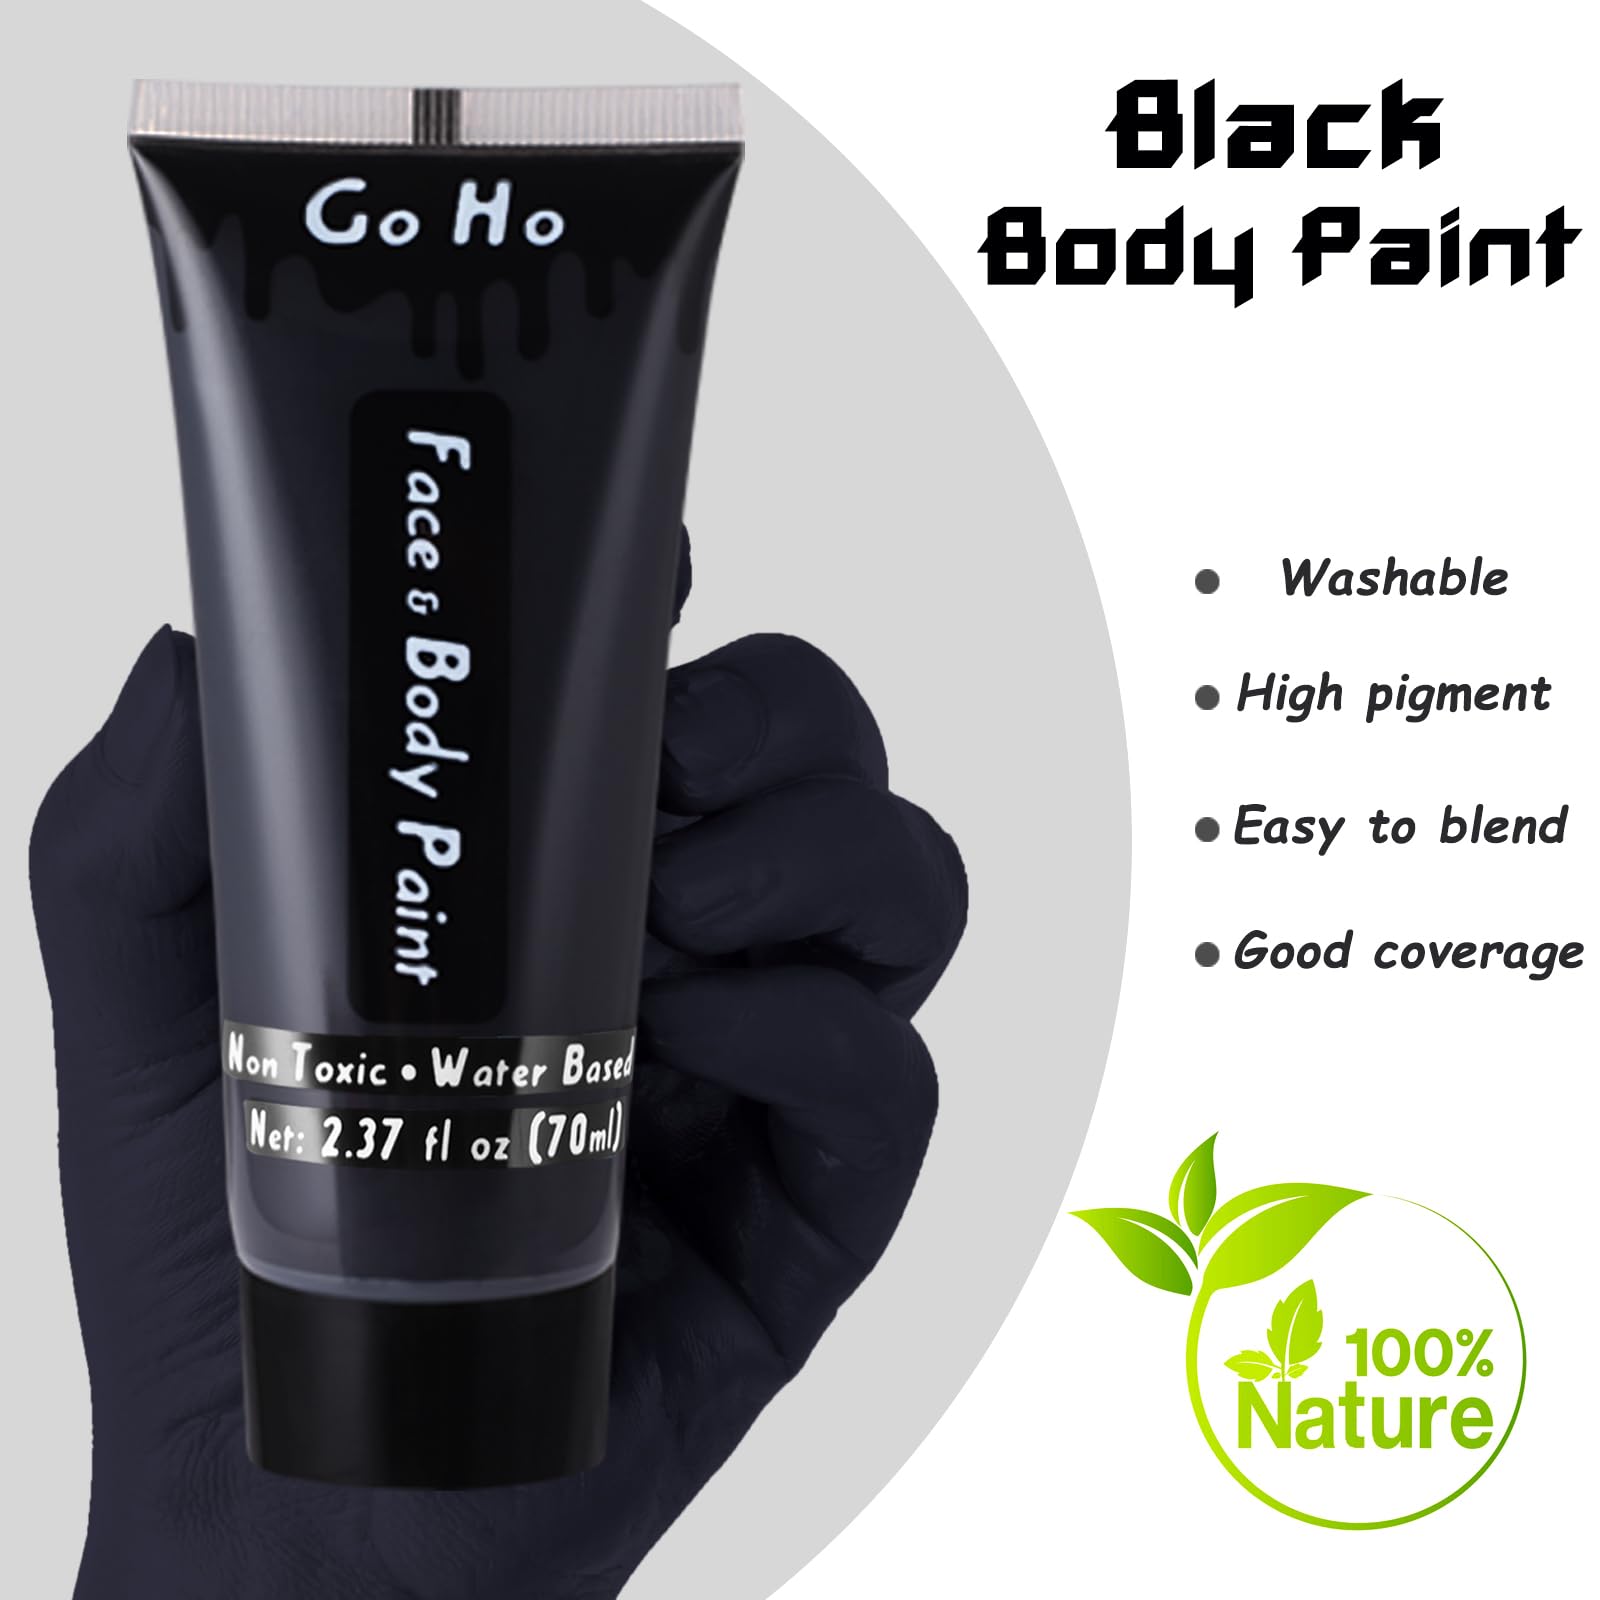 Go Ho Black Body Paint Washable(2.37 oz),Water Based Black Face Paint,Makeup Skull Skeleton Clown Black Face Body Paint for SFX Cosplay Costumes Festivals Halloween Make up